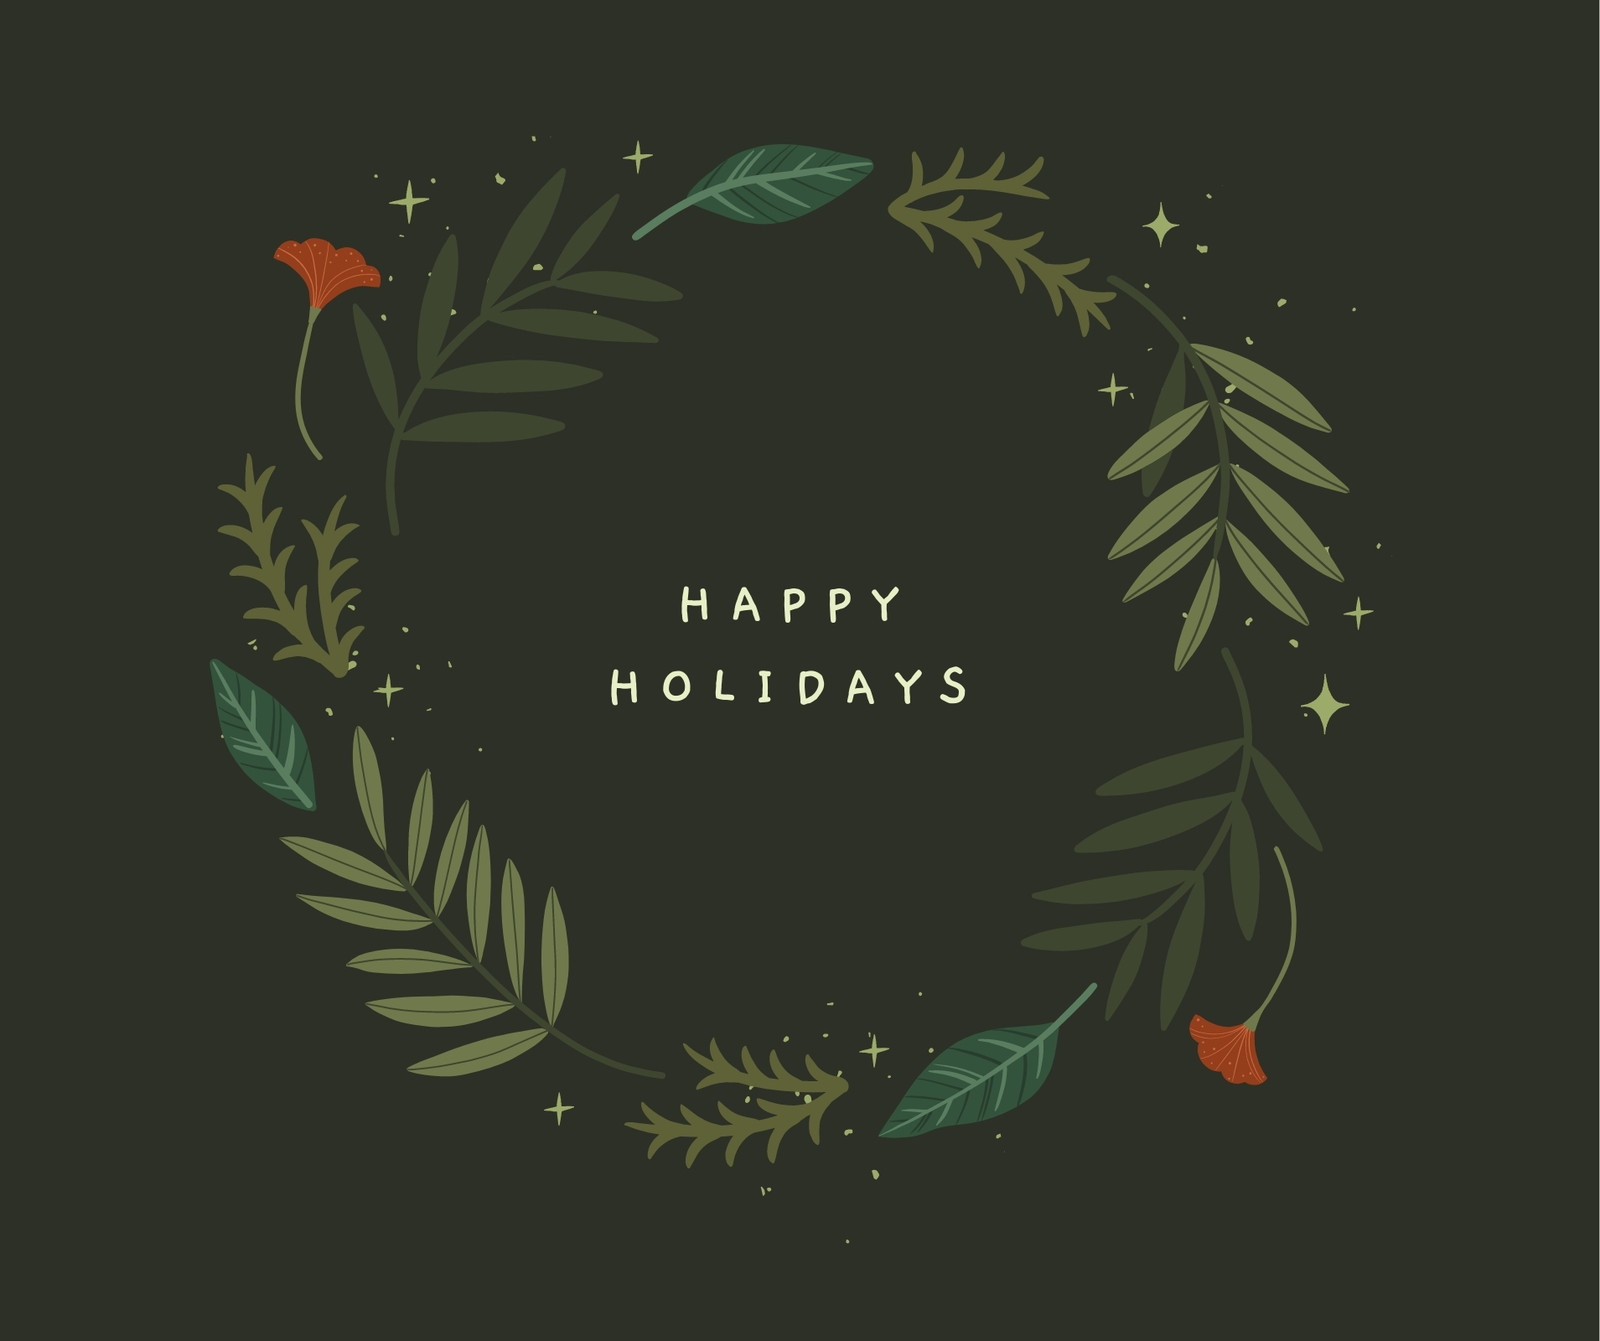 Page 3 - Free and customizable happy holidays templates